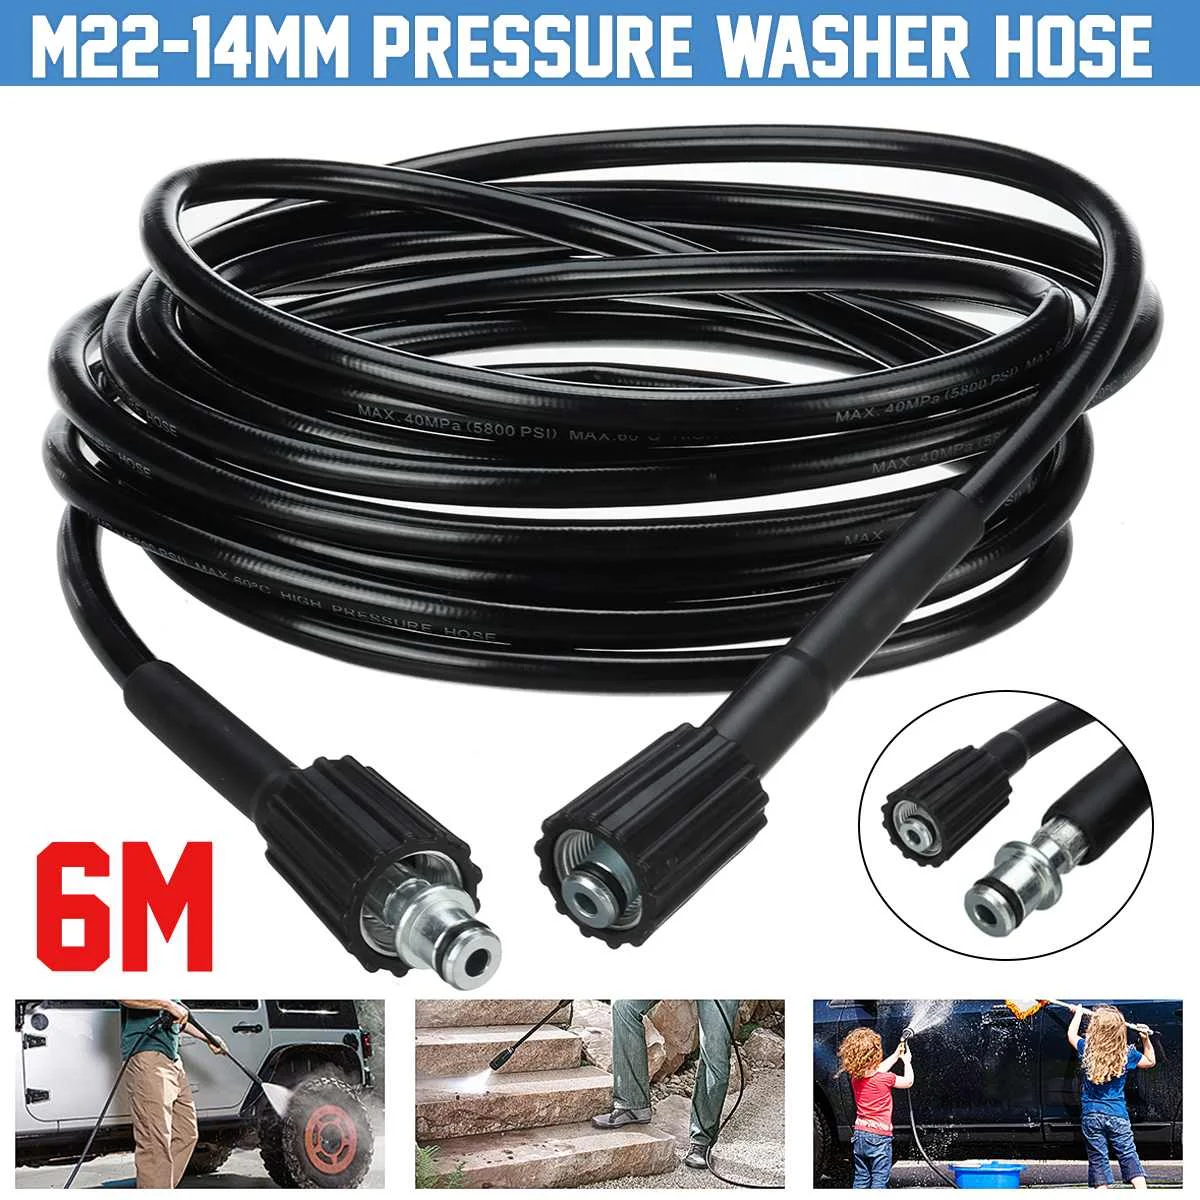 

6/10/15/30m High Pressure Washer Cleaning Hose M22-14mm 3000Psi Car Cleaning Wash Nozzles Washing For Karcher K2 K3 K5 K7